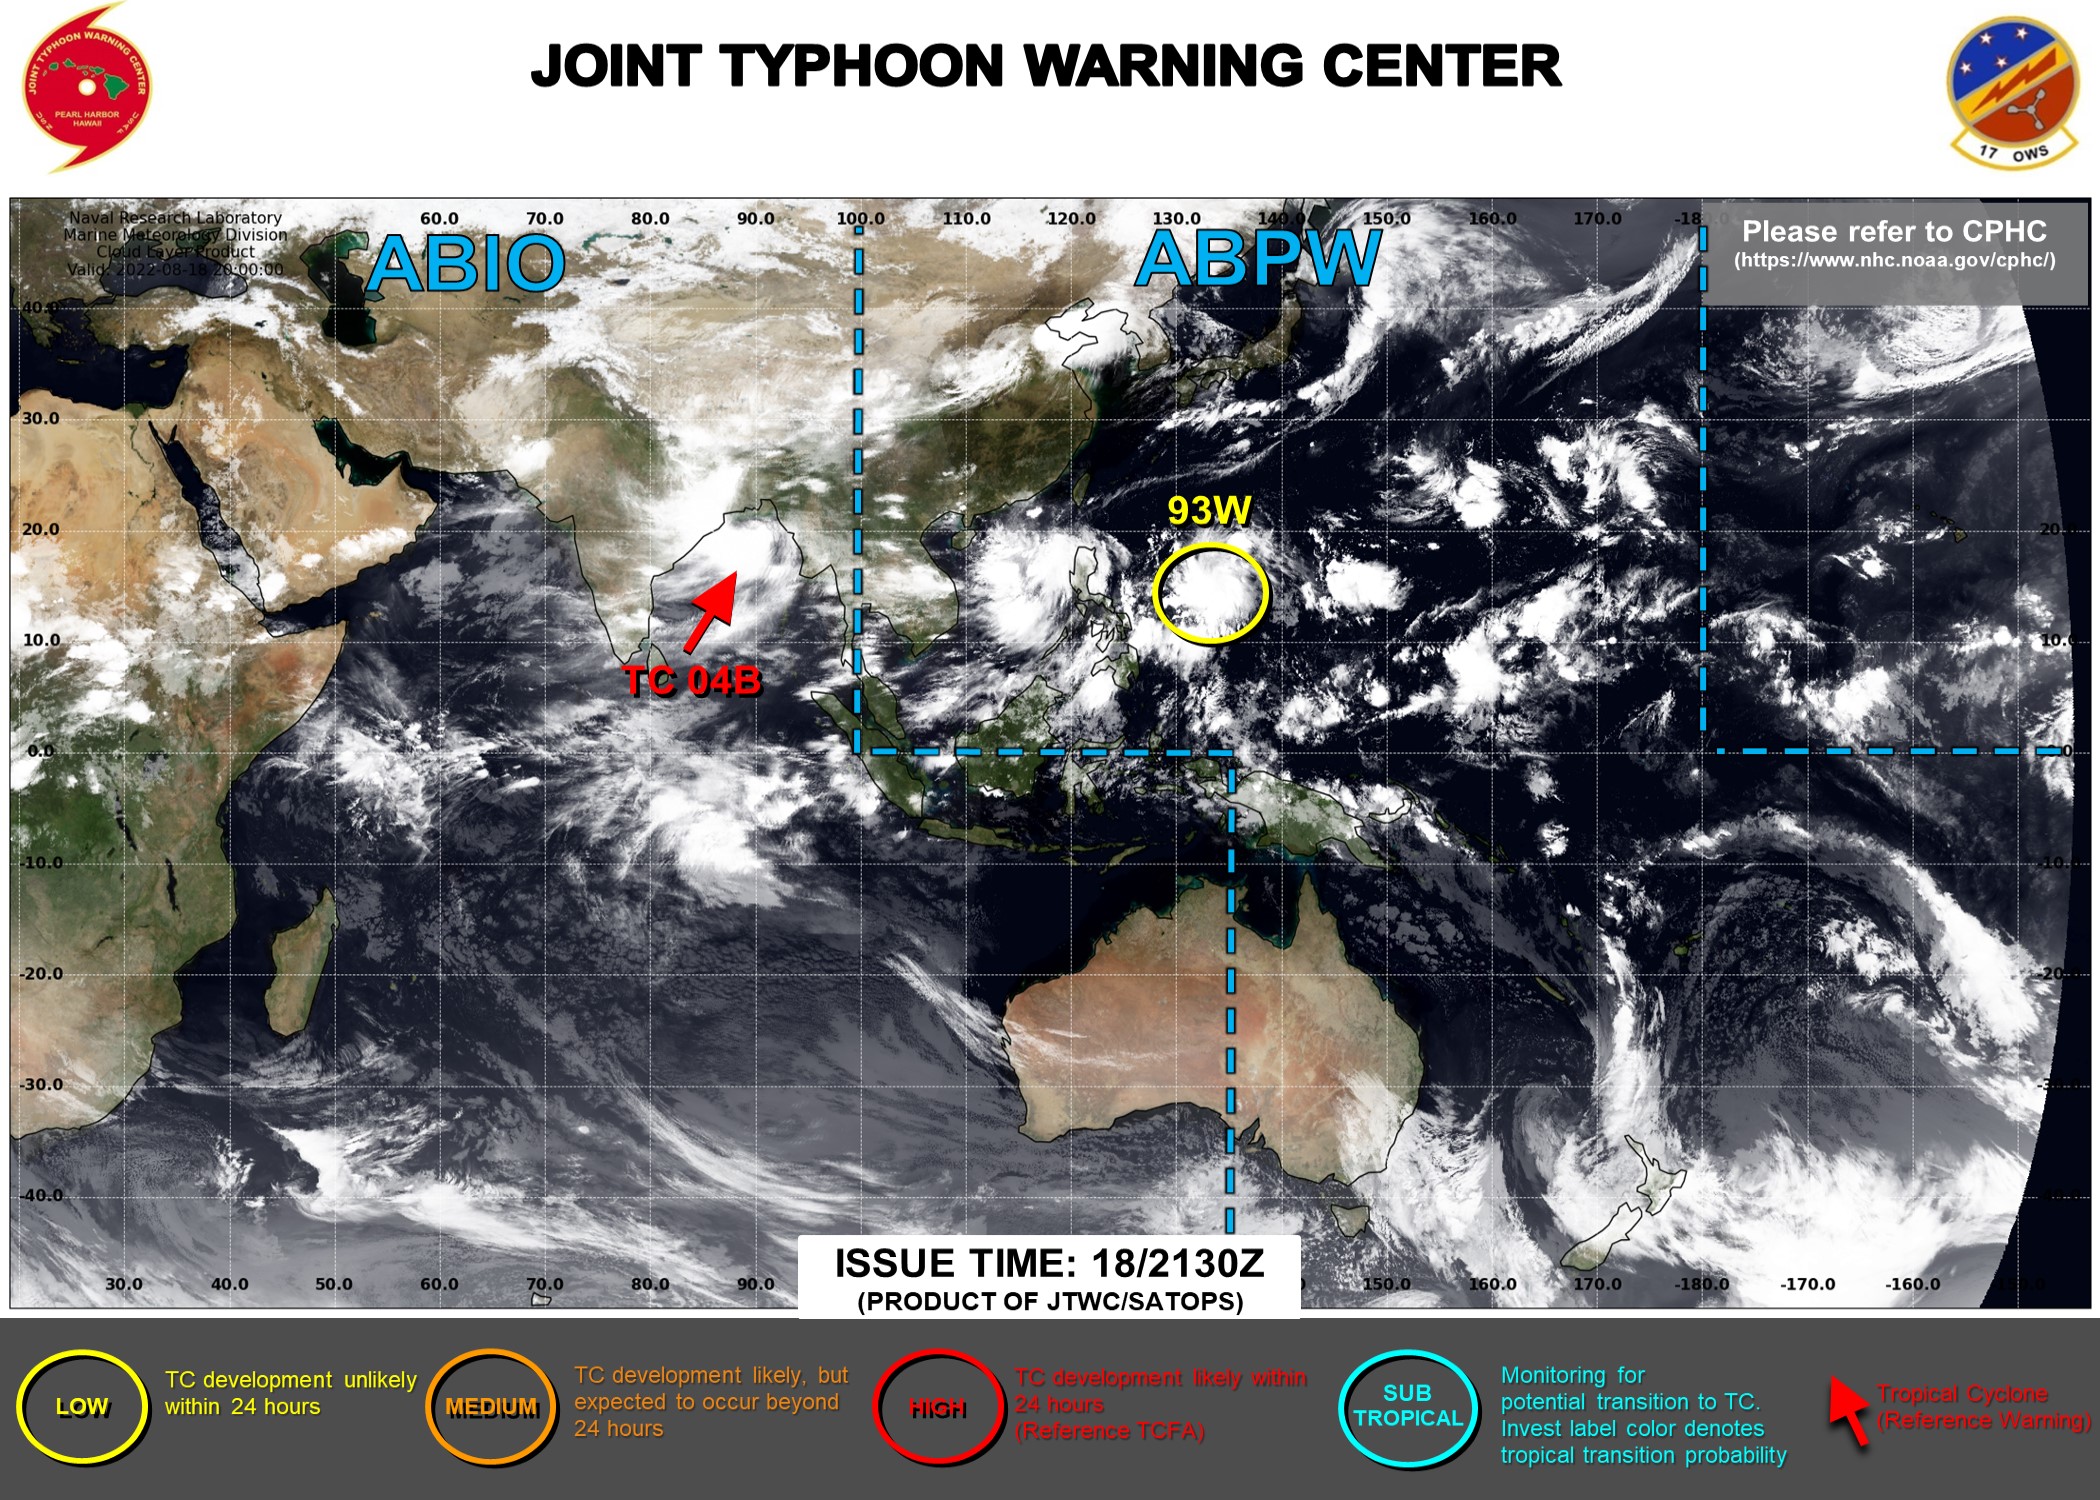 JTWC IS ISSUING 6HOURLY WARNINGS AND 3HOURLY SATELLITE BULLETINS ON TC 04B